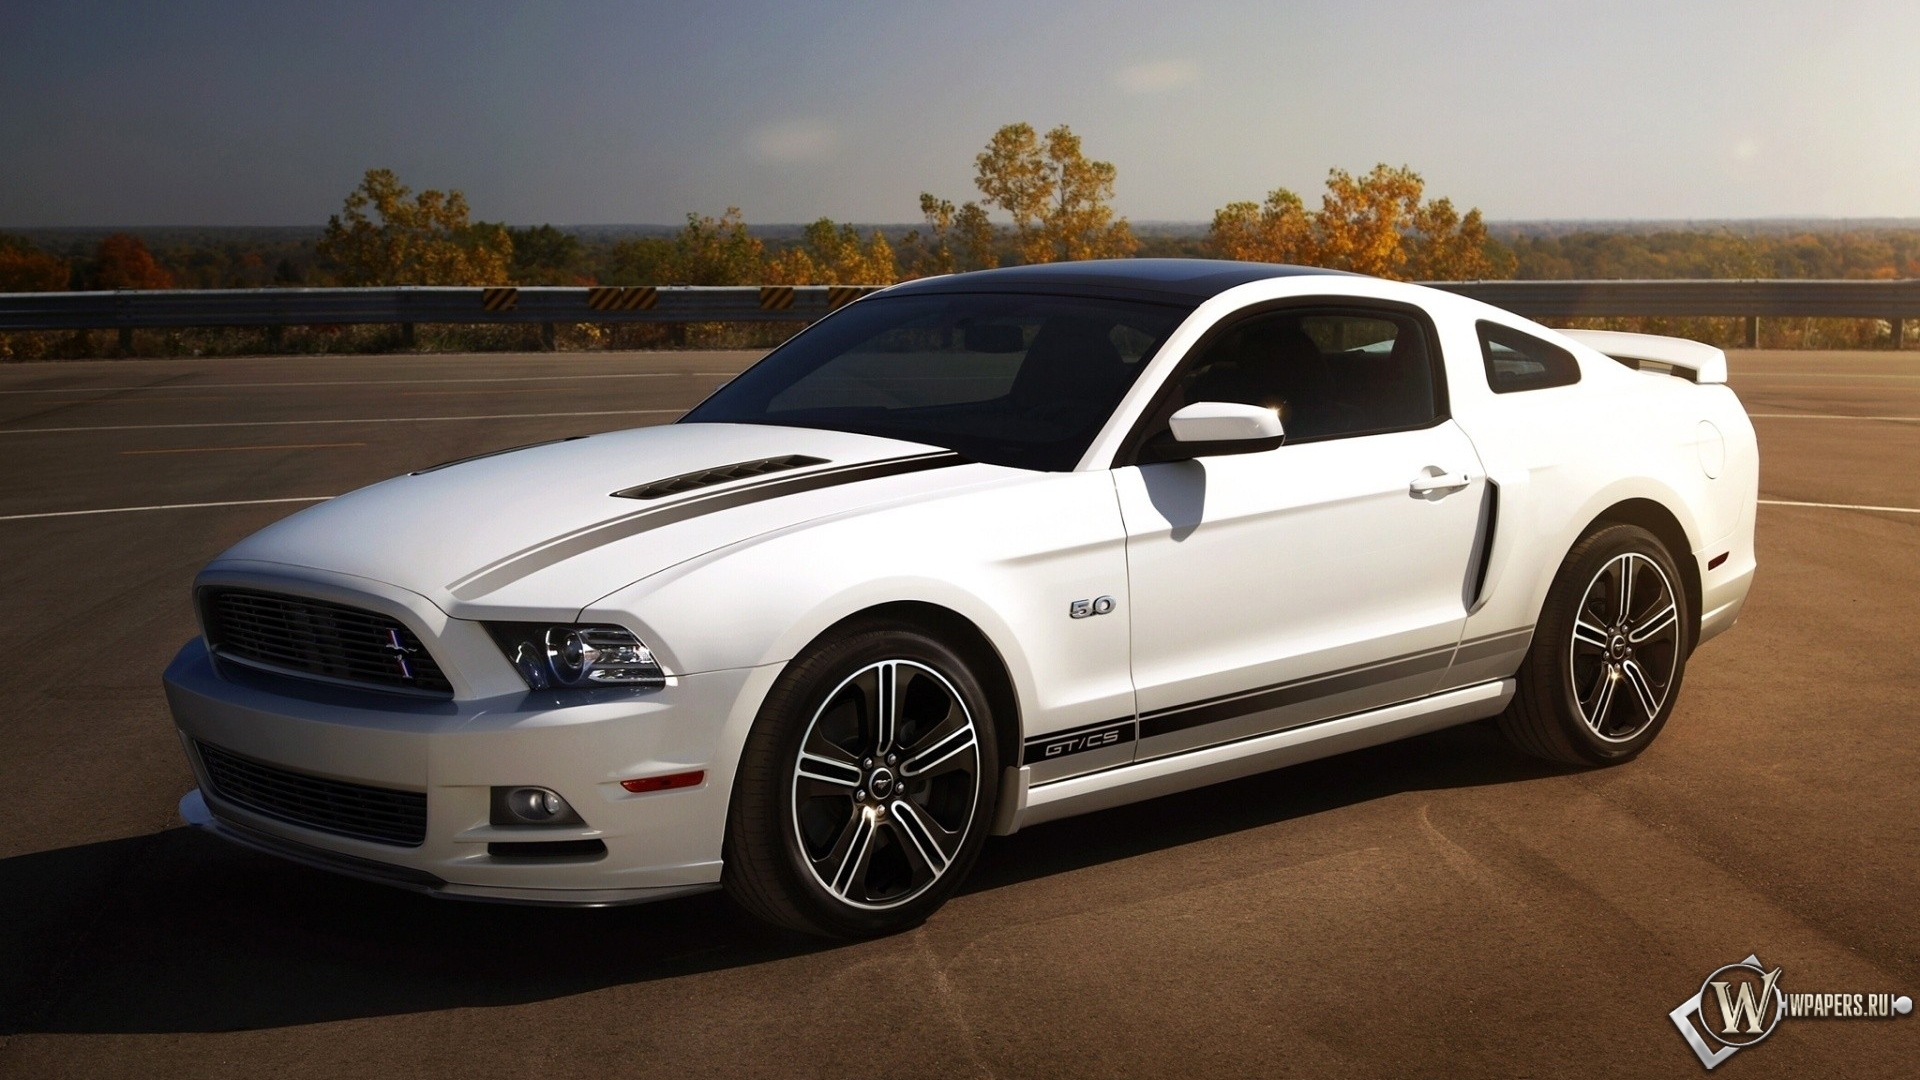 Ford Mustang V8 5.0 1920x1080